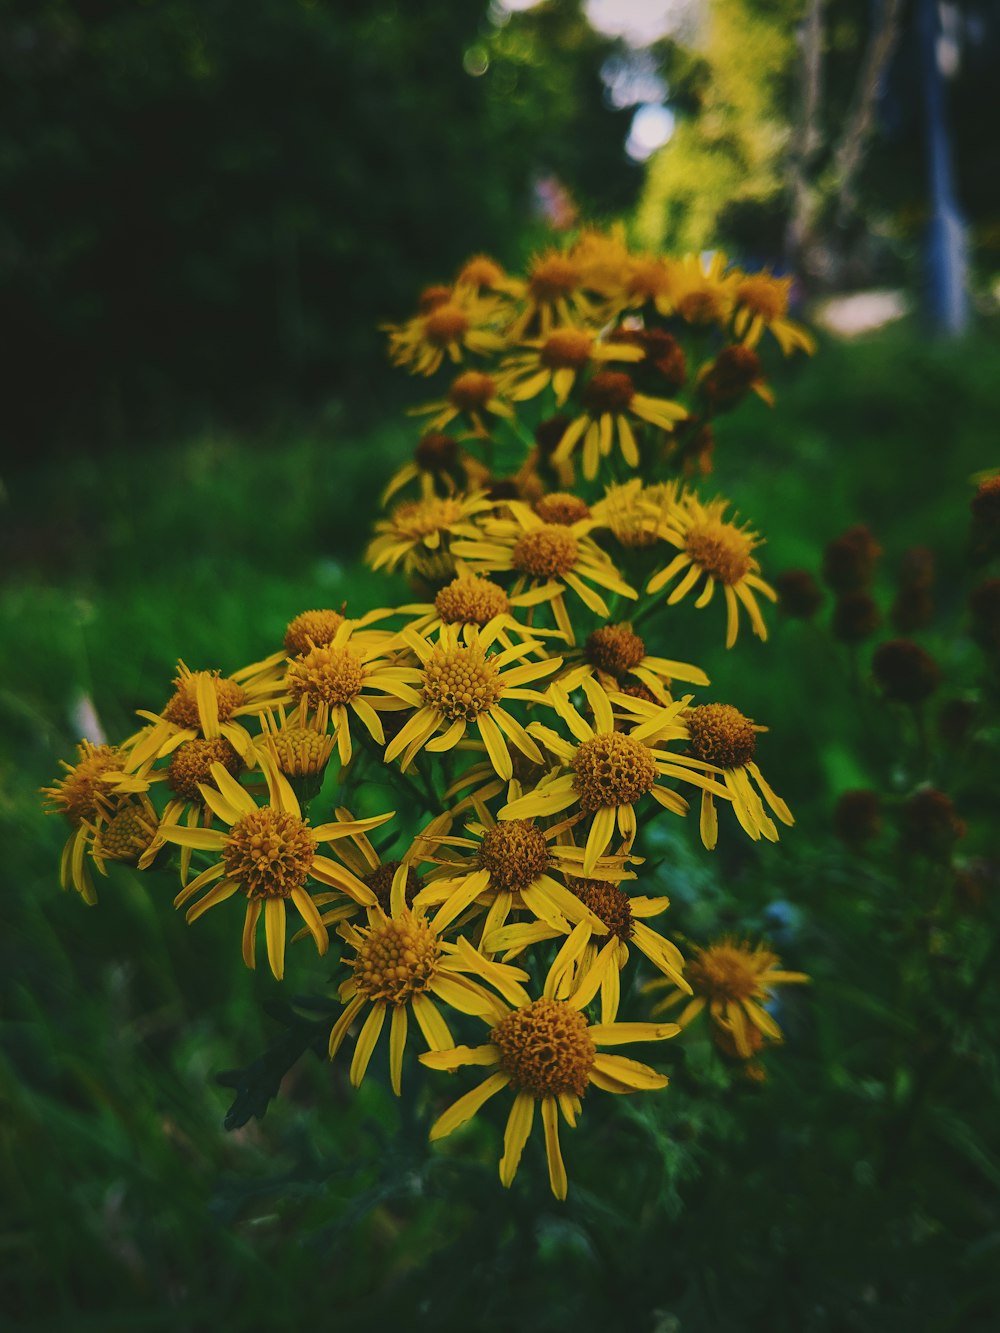 yellow petaled flowers in close-up photo